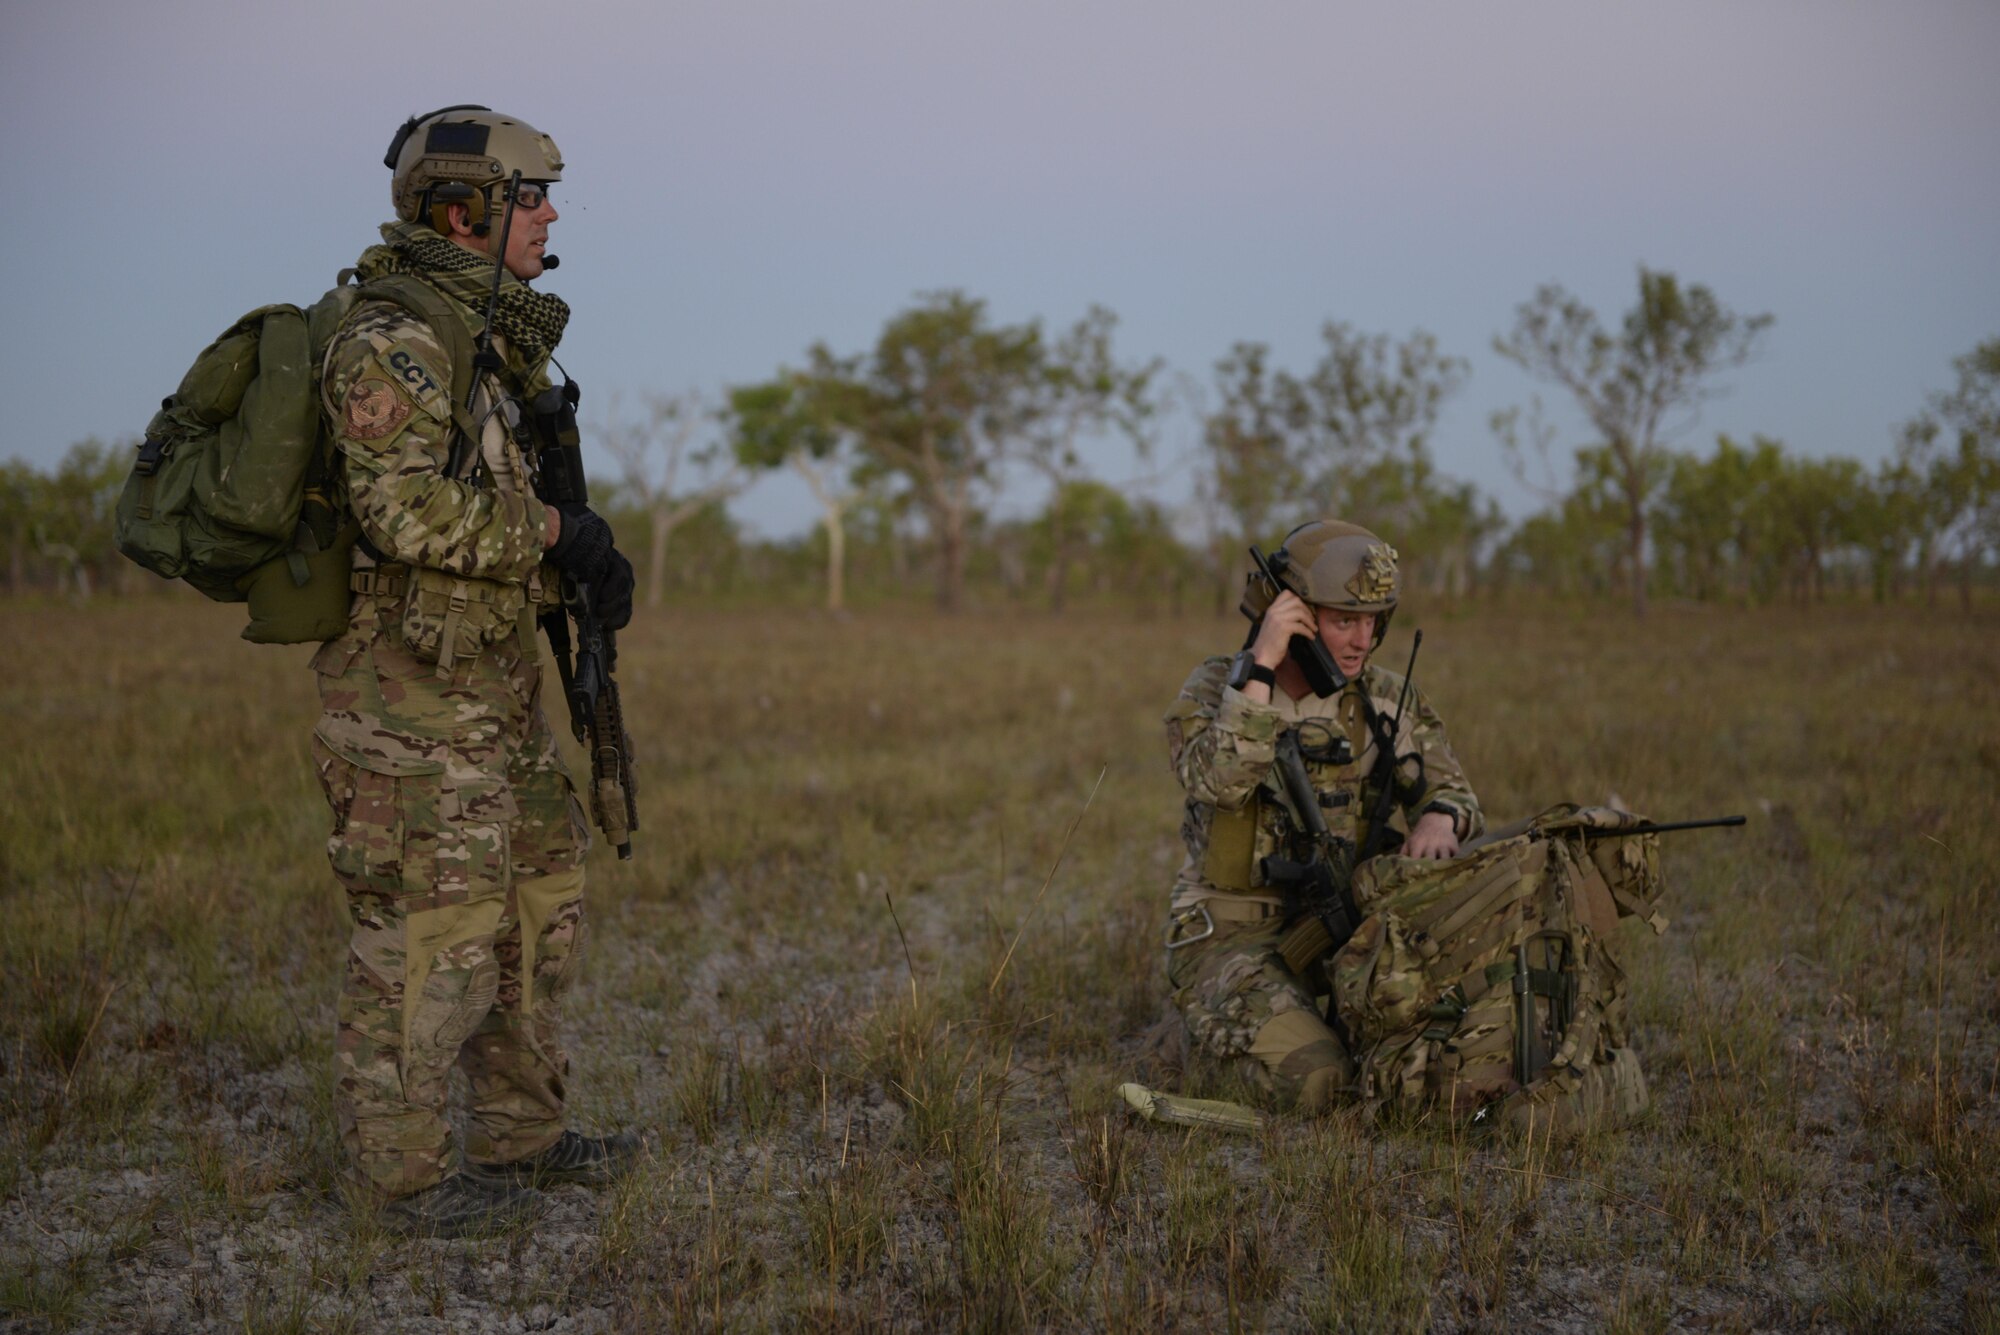 A special tactics combat controller and special tactics officer from the 320th Special Tactics Squadron get ready for a personnel recovery mission after performing a high altitude low opening jump during exercise Talisman Sabre in Northern Territory, Australia, July 10, 2015. The personnel recovery team consisted of four combat controllers, one special operations weatherman and one special tactics officer. (U.S. Air Force photo by Senior Airman Stephen G. Eigel)